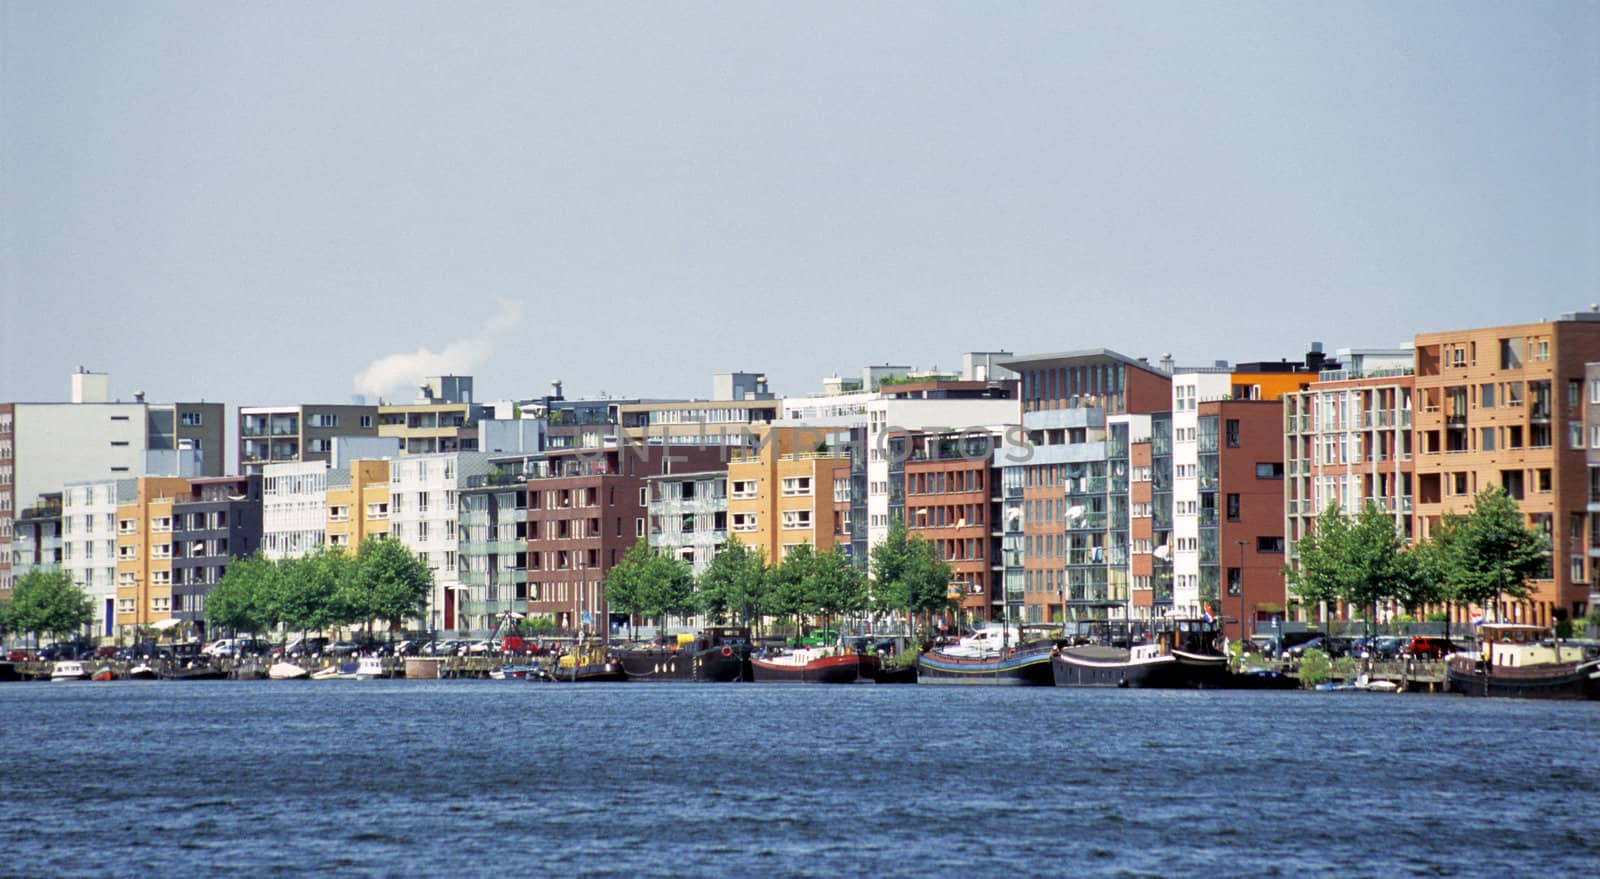 Modern condominiums line the entirely man-made landmass known as Java Island in Amsterdam.